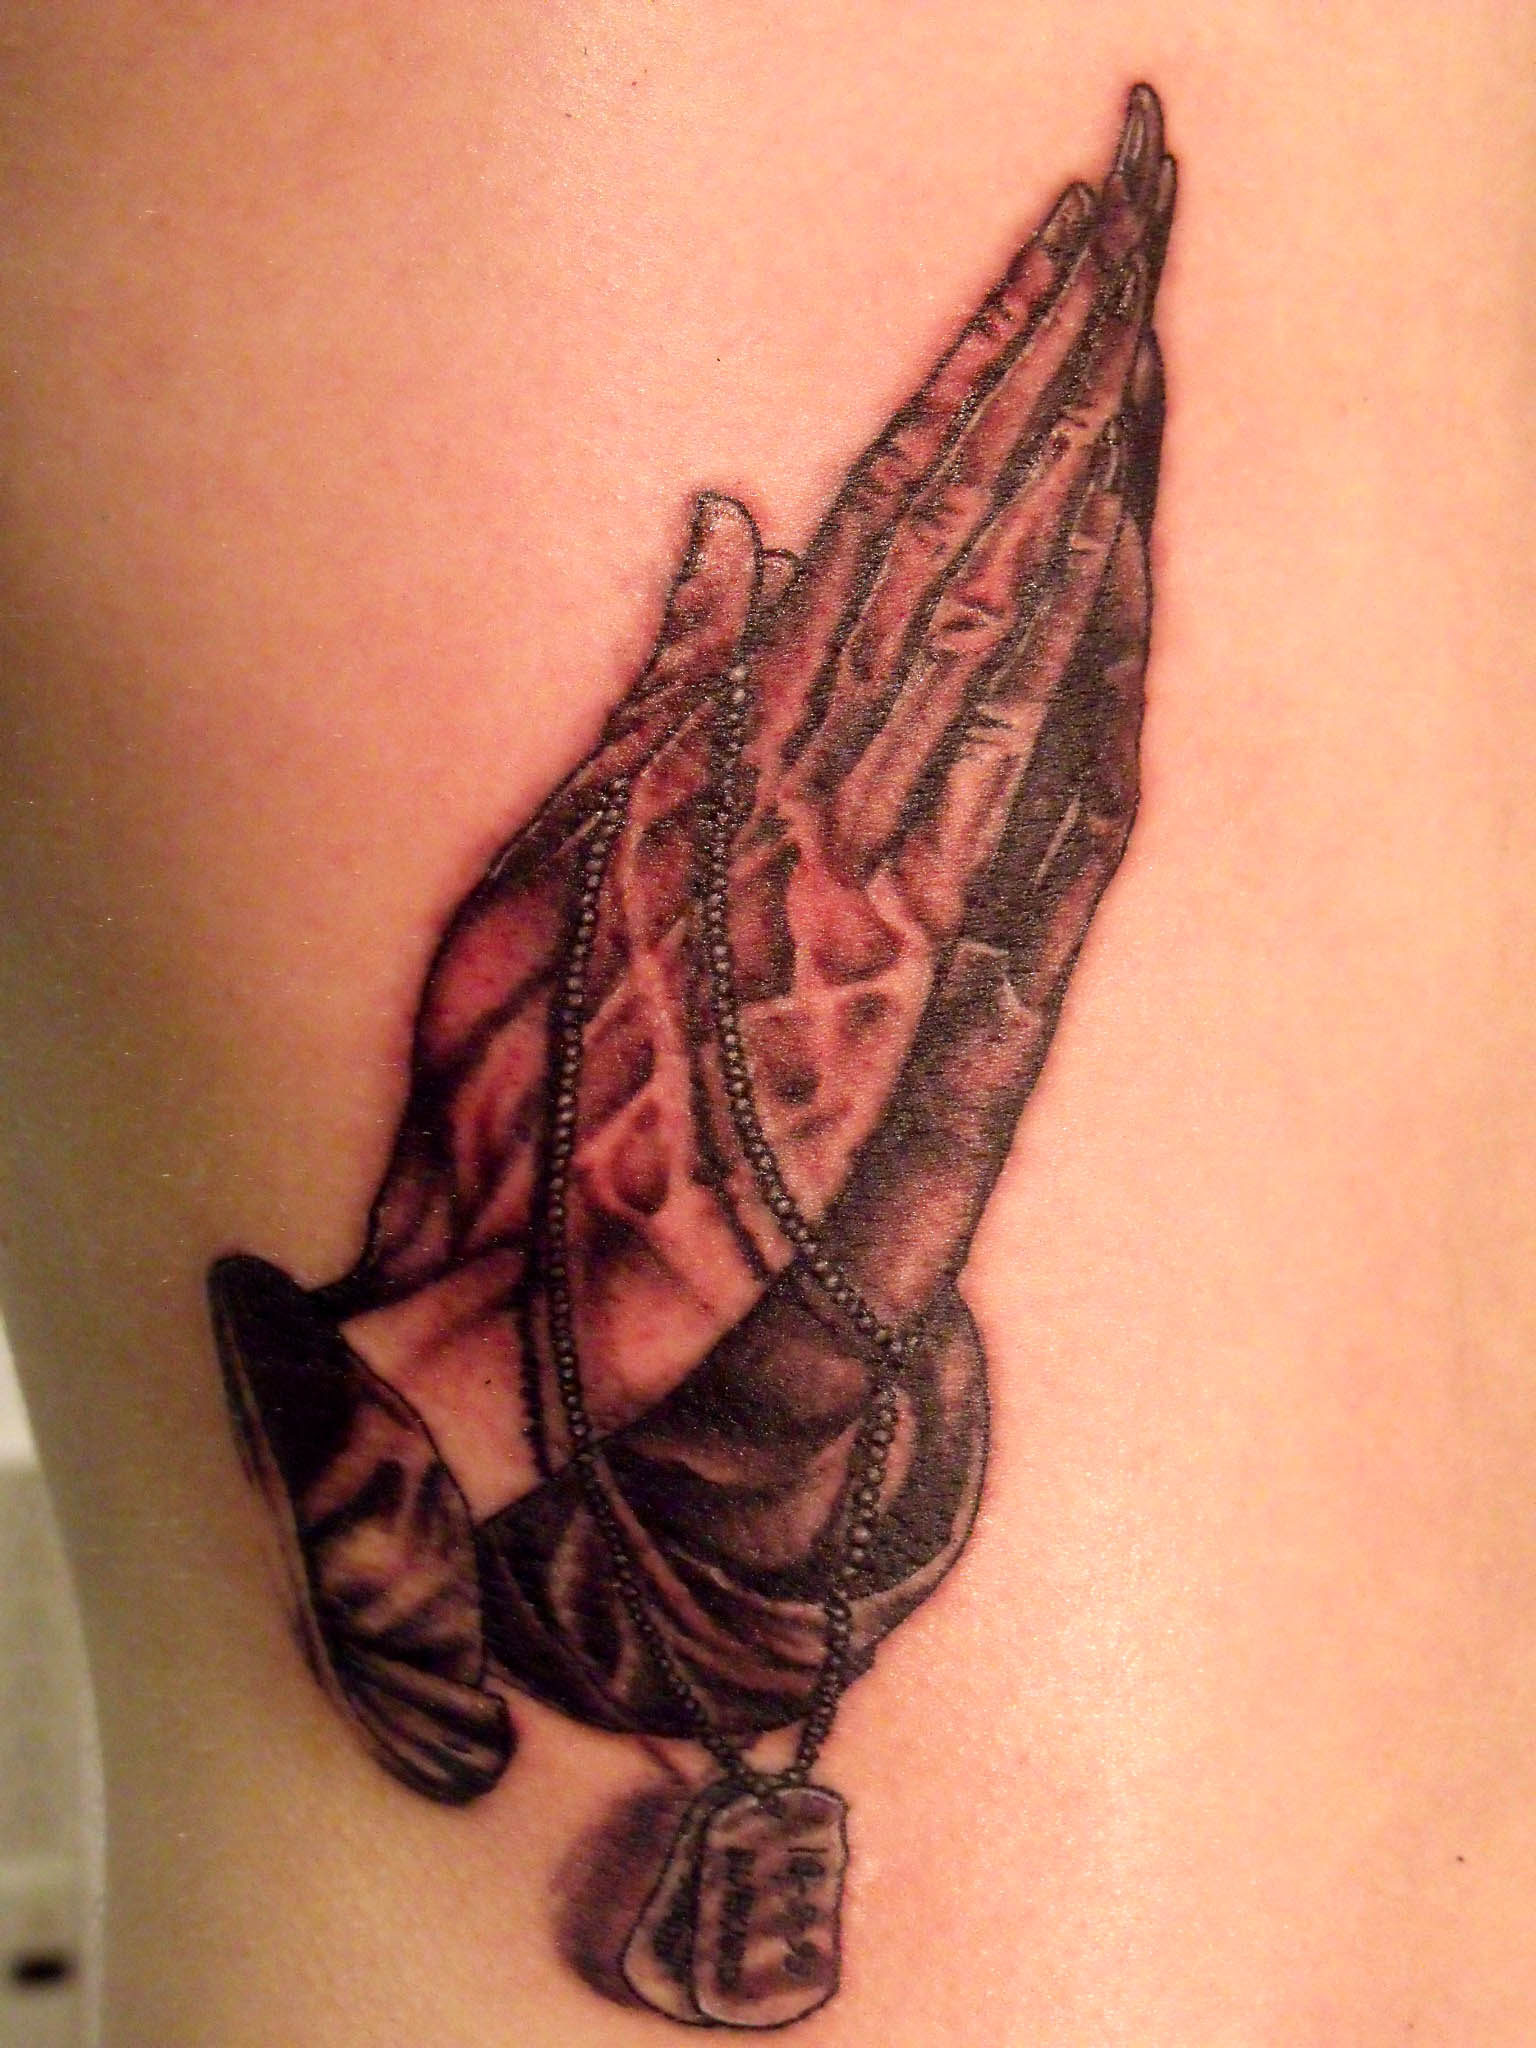 praying hands took about 3 hours fingers look elongated because his arm was lifted to take the picture